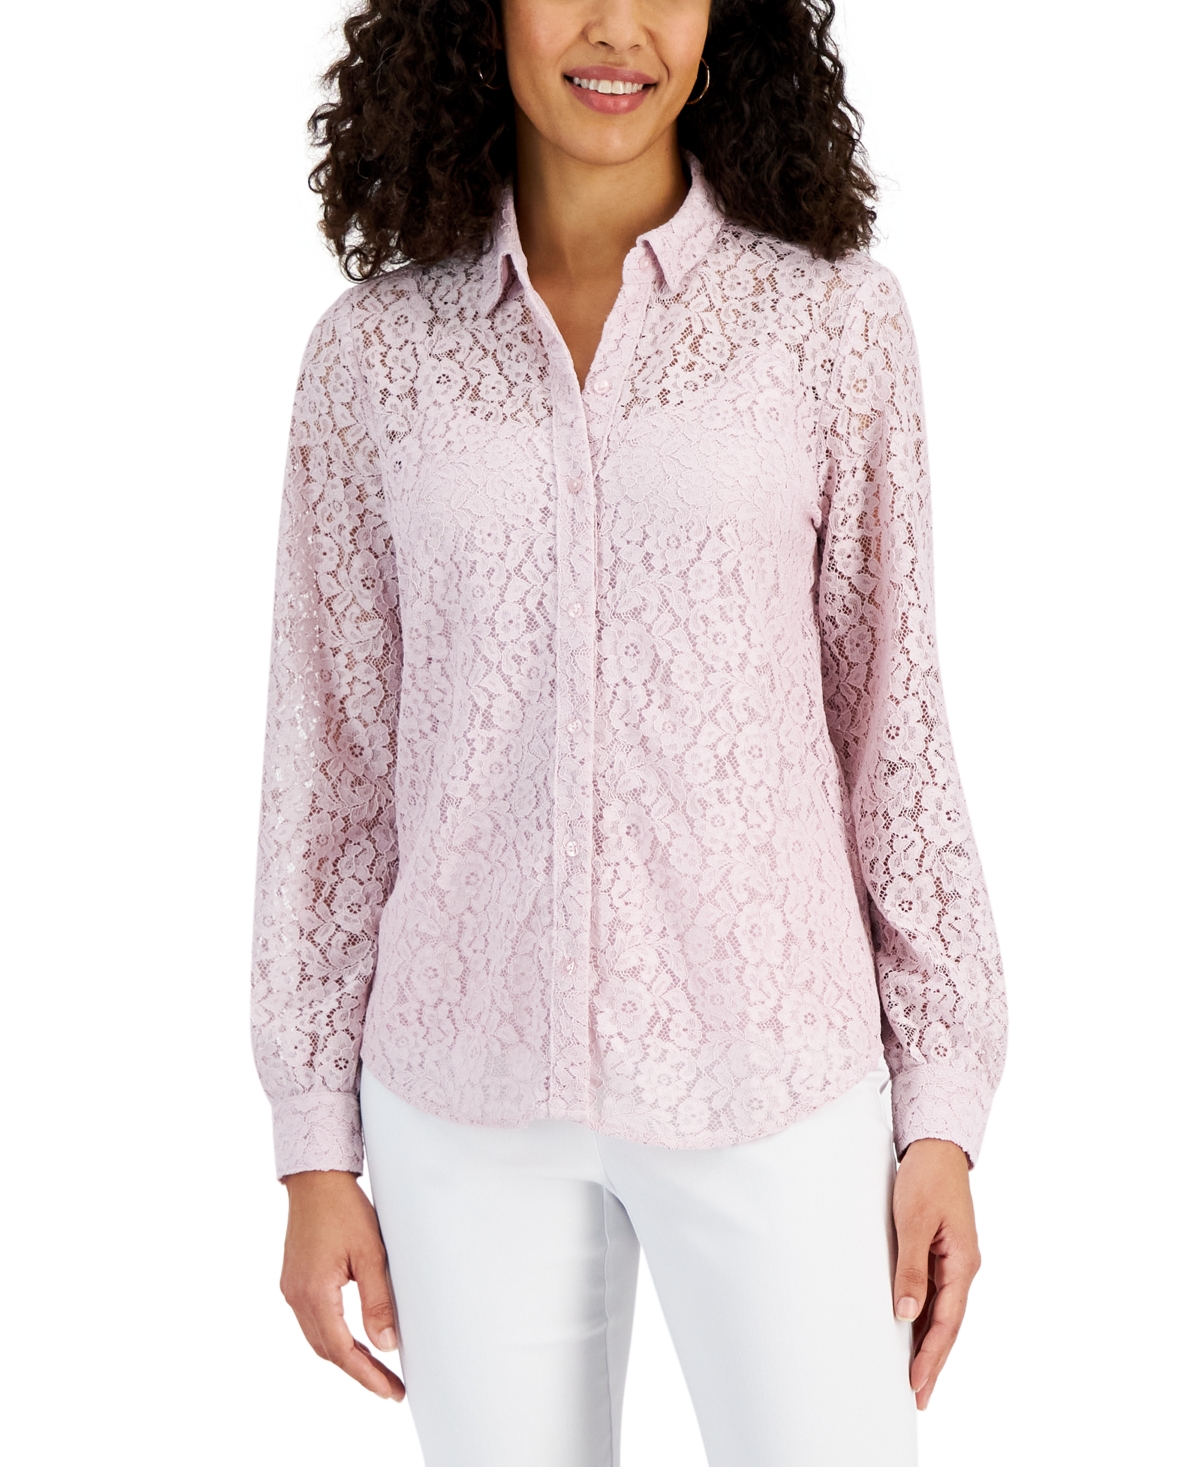 JM COLLECTION WOMEN'S LACE BUTTON-DOWN LONG-SLEEVE SHIRT, CREATED FOR MACY'S